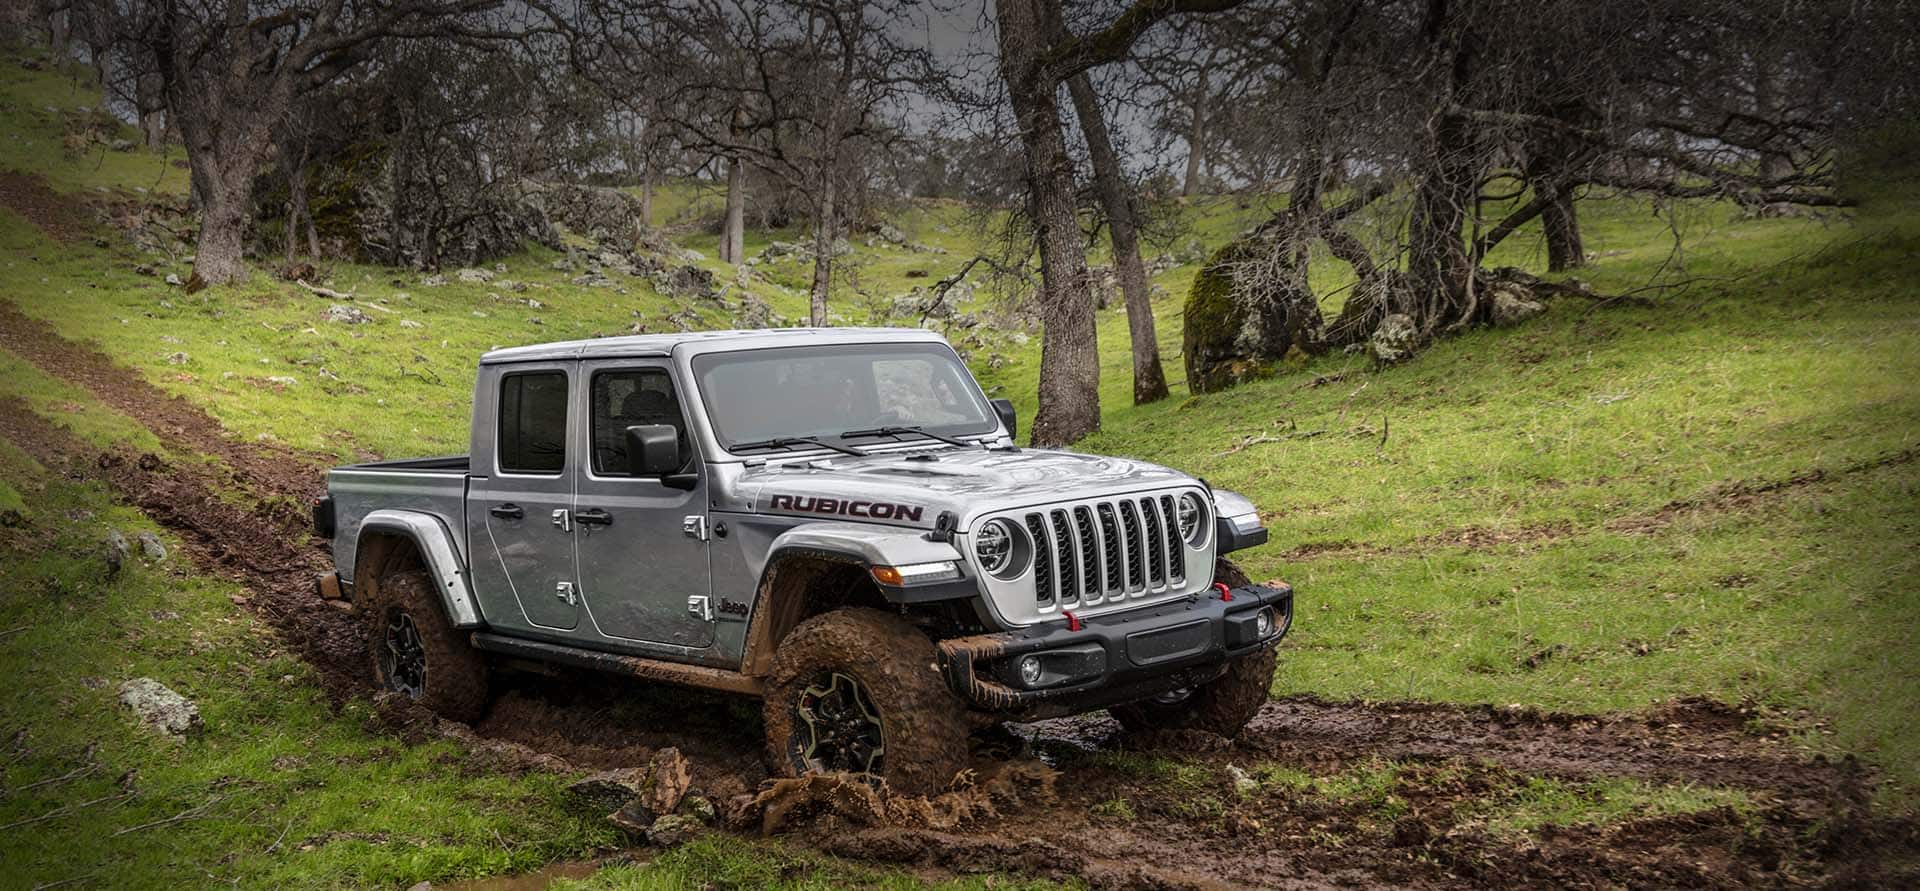 The 2023 Jeep Gladiator Rubicon being driven off-road on a muddy downhill slope.